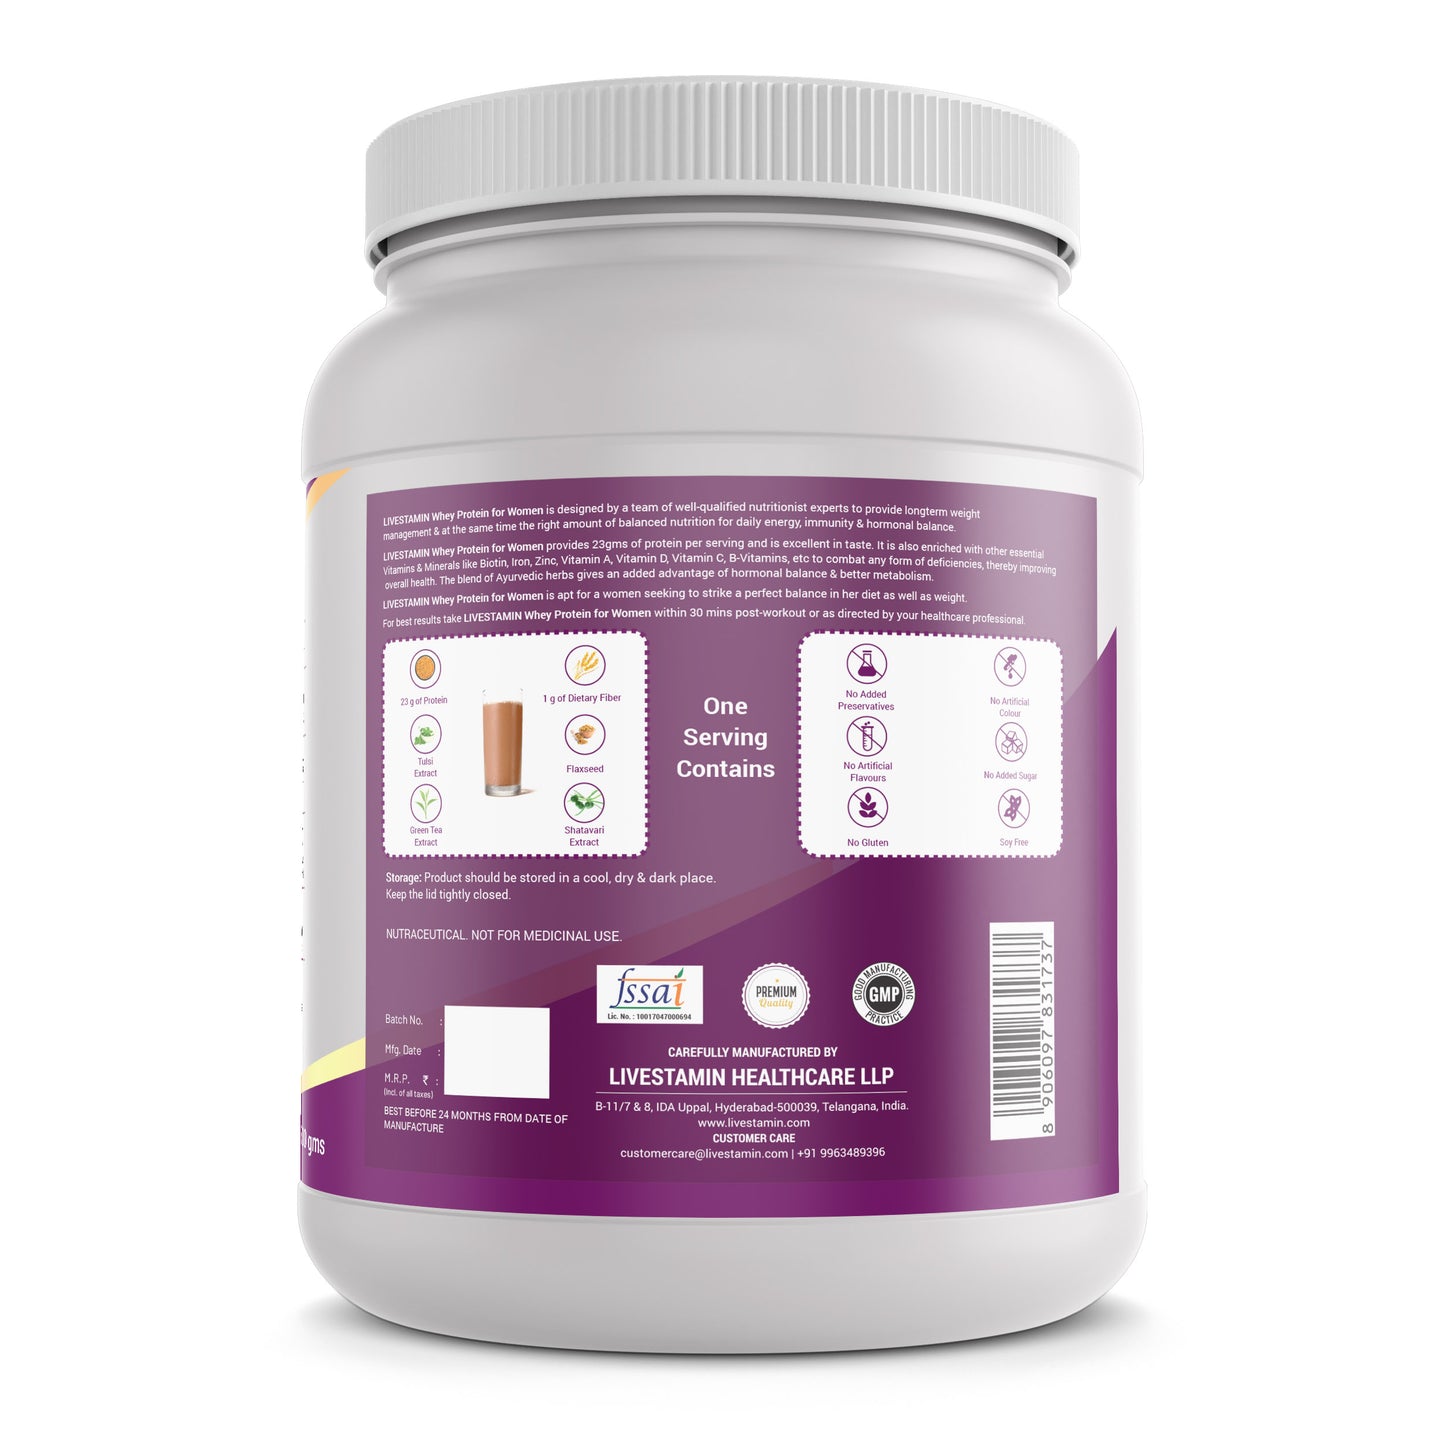 Whey Protein For Women with Ayurvedic Herbs (Chocolate Flavour)